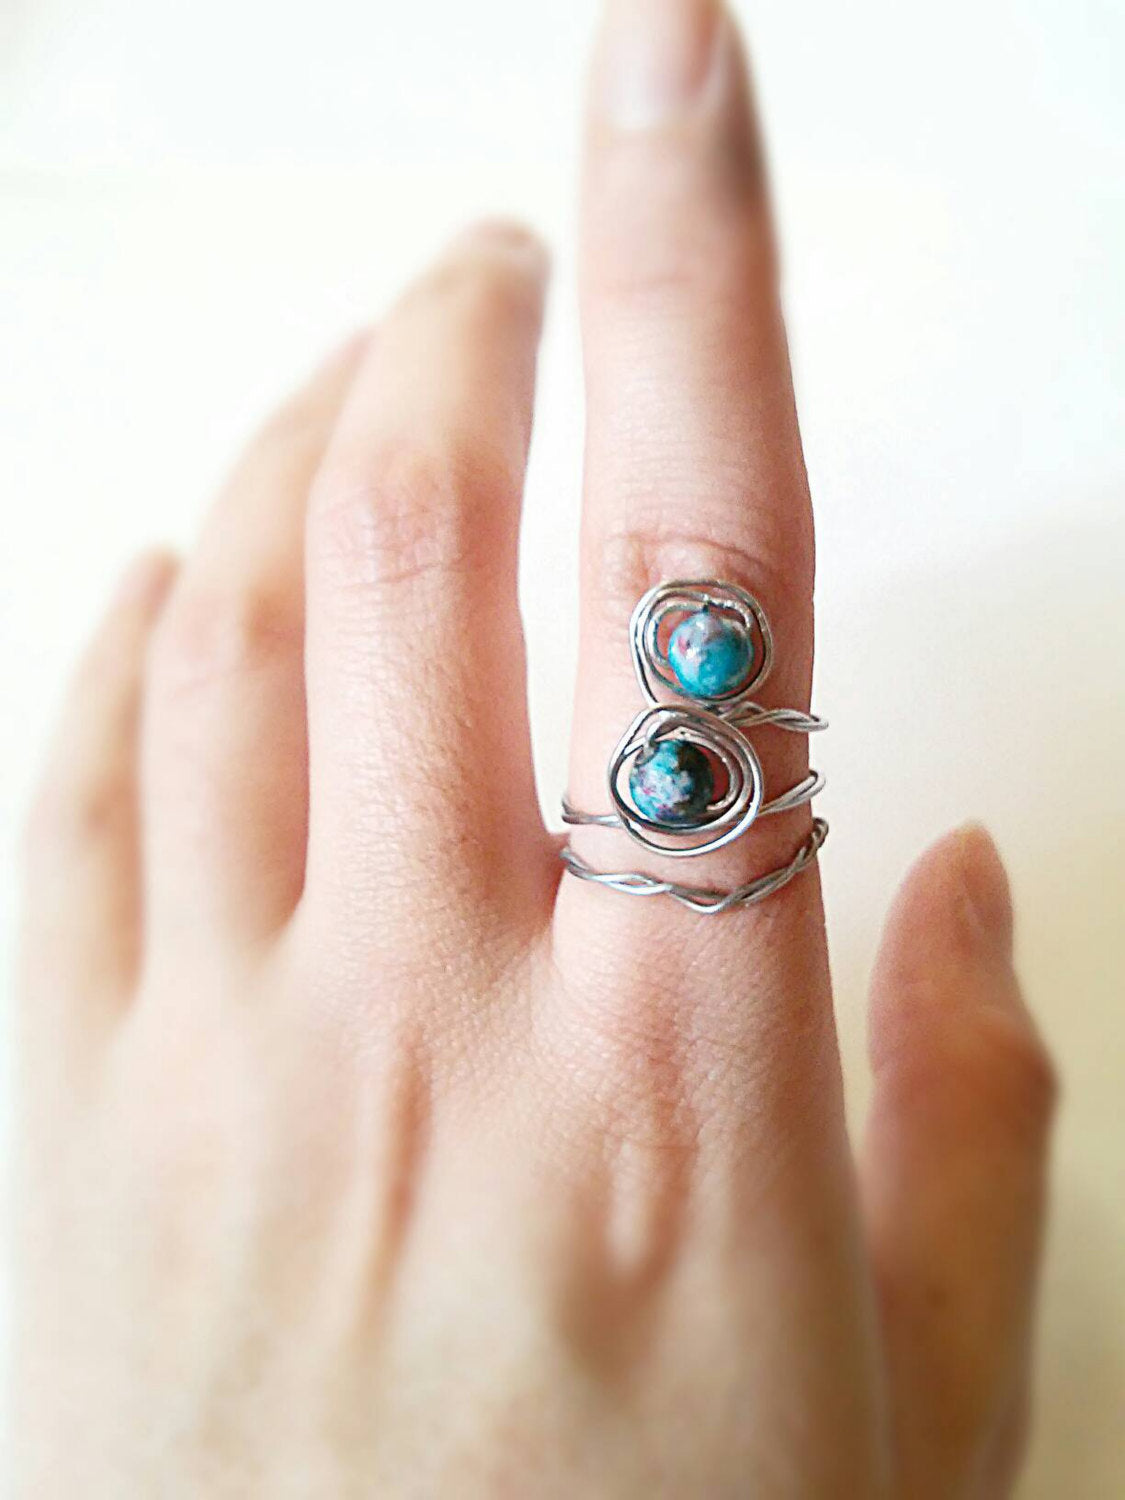 2 Boho stone stackable ring set/double stone ring/hippie ring/silver boho ring set/hippie stone ring/adjustable ring/boho ring gift for her